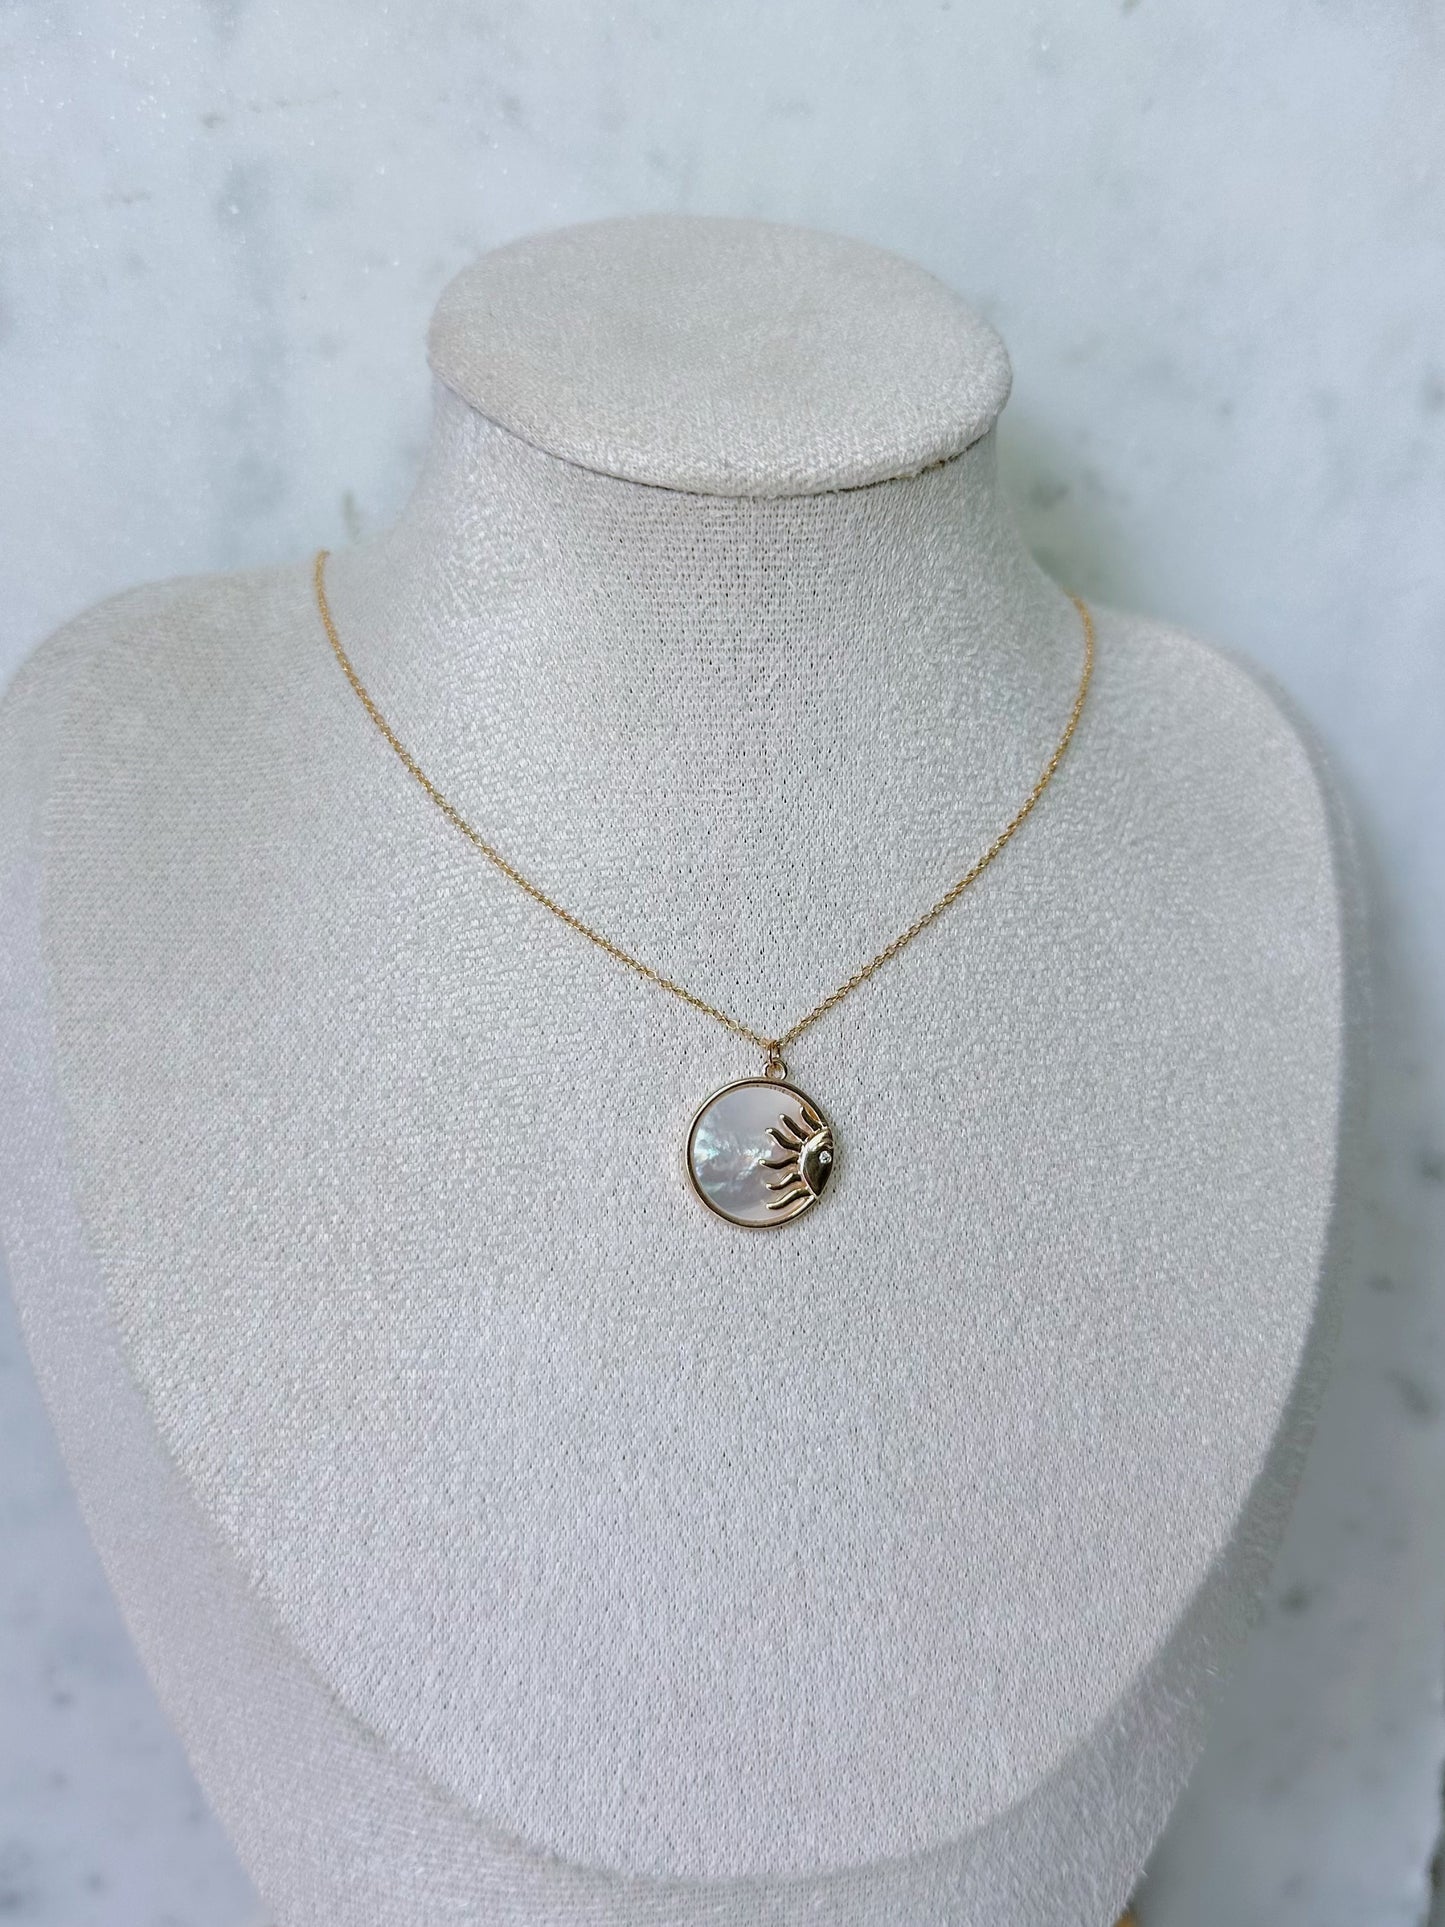 Sunkissed glow necklace